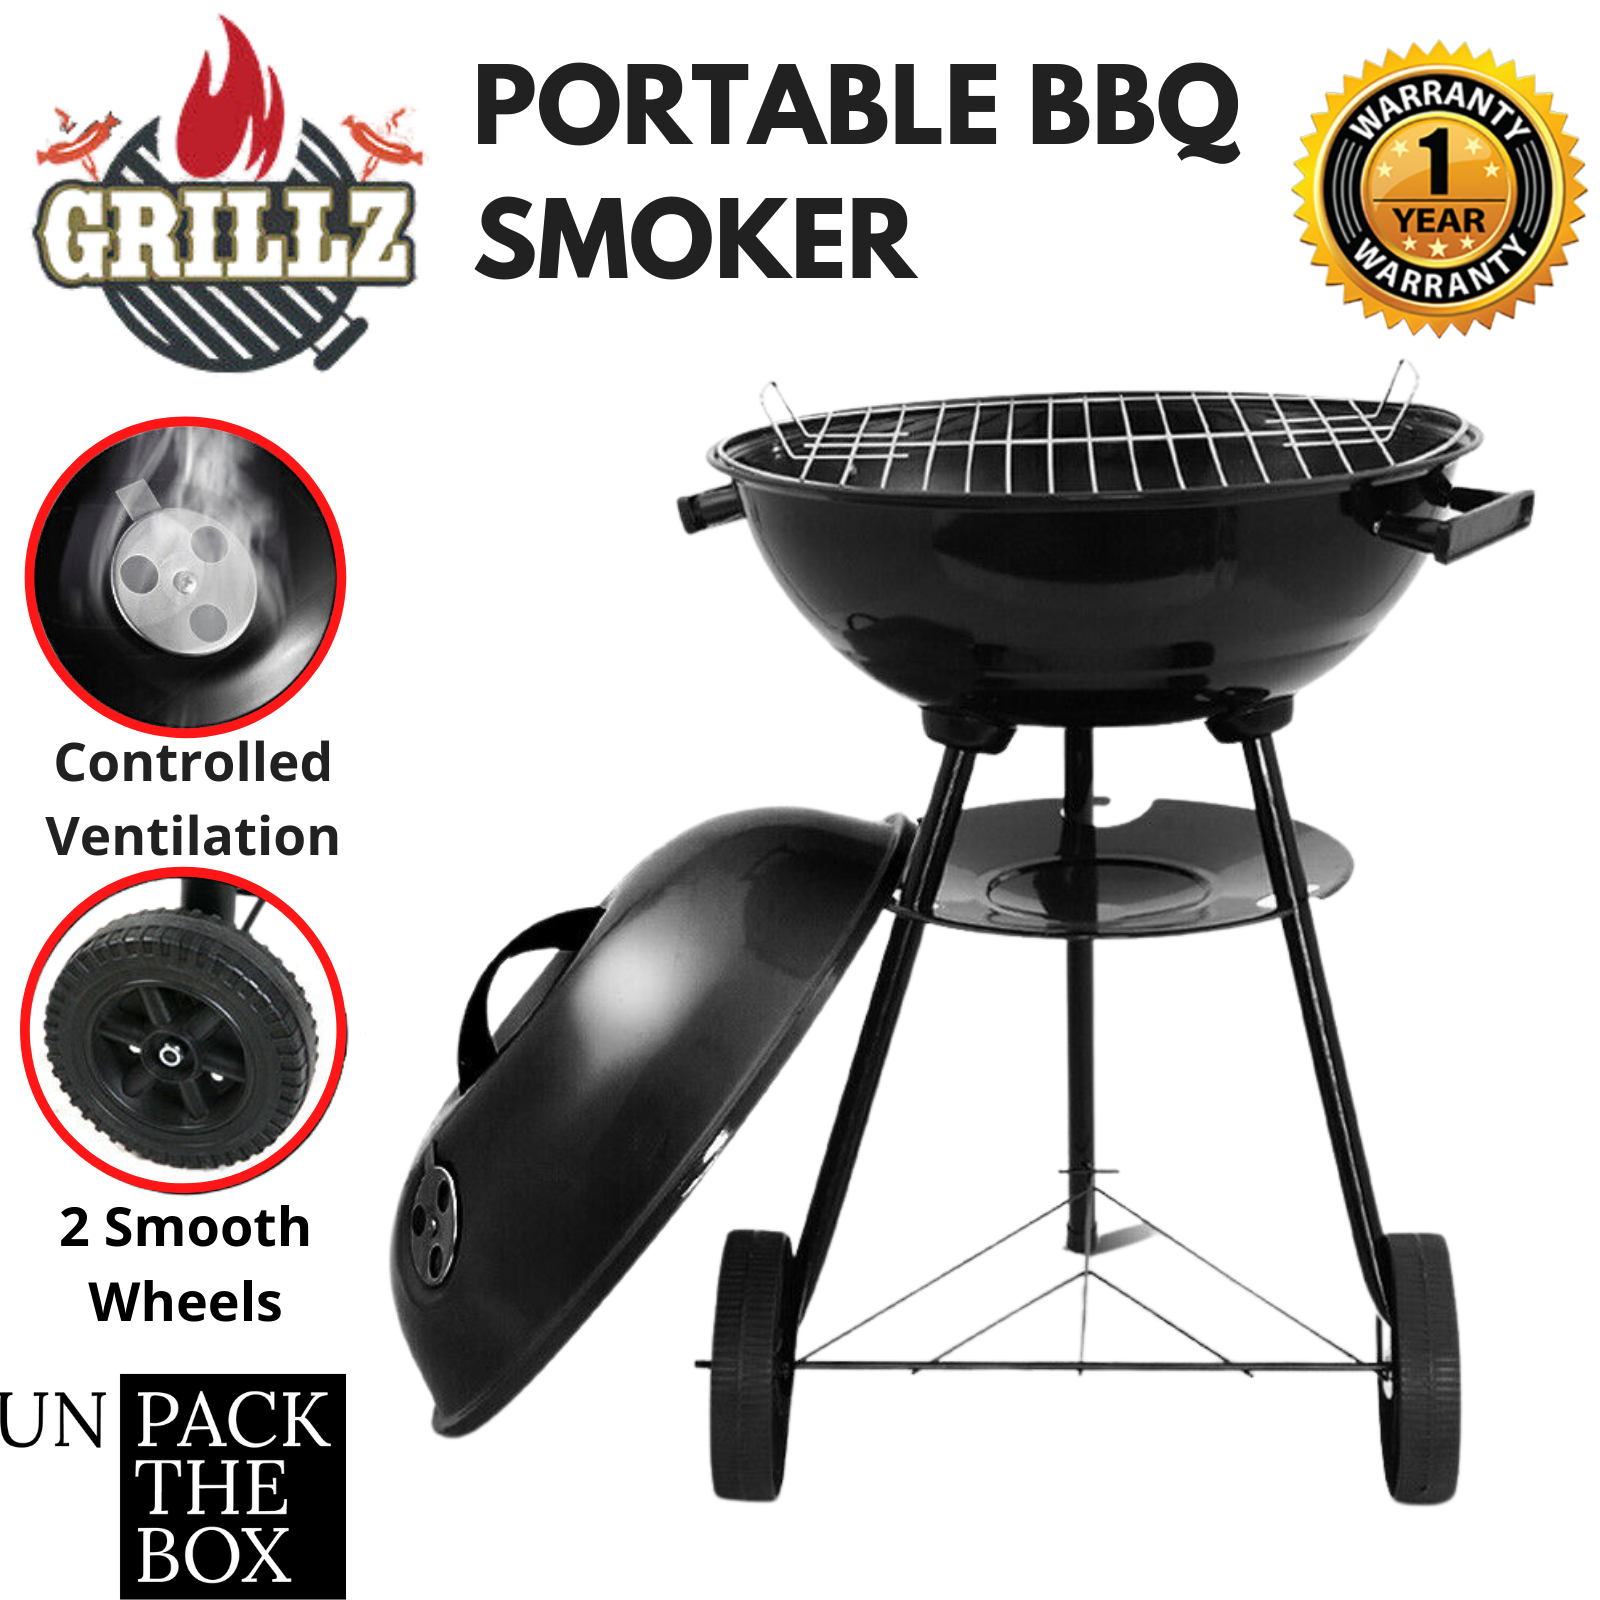 Grill and smoke your food in exceptional style with the outstanding Grillz Portable BBQ Smoker.